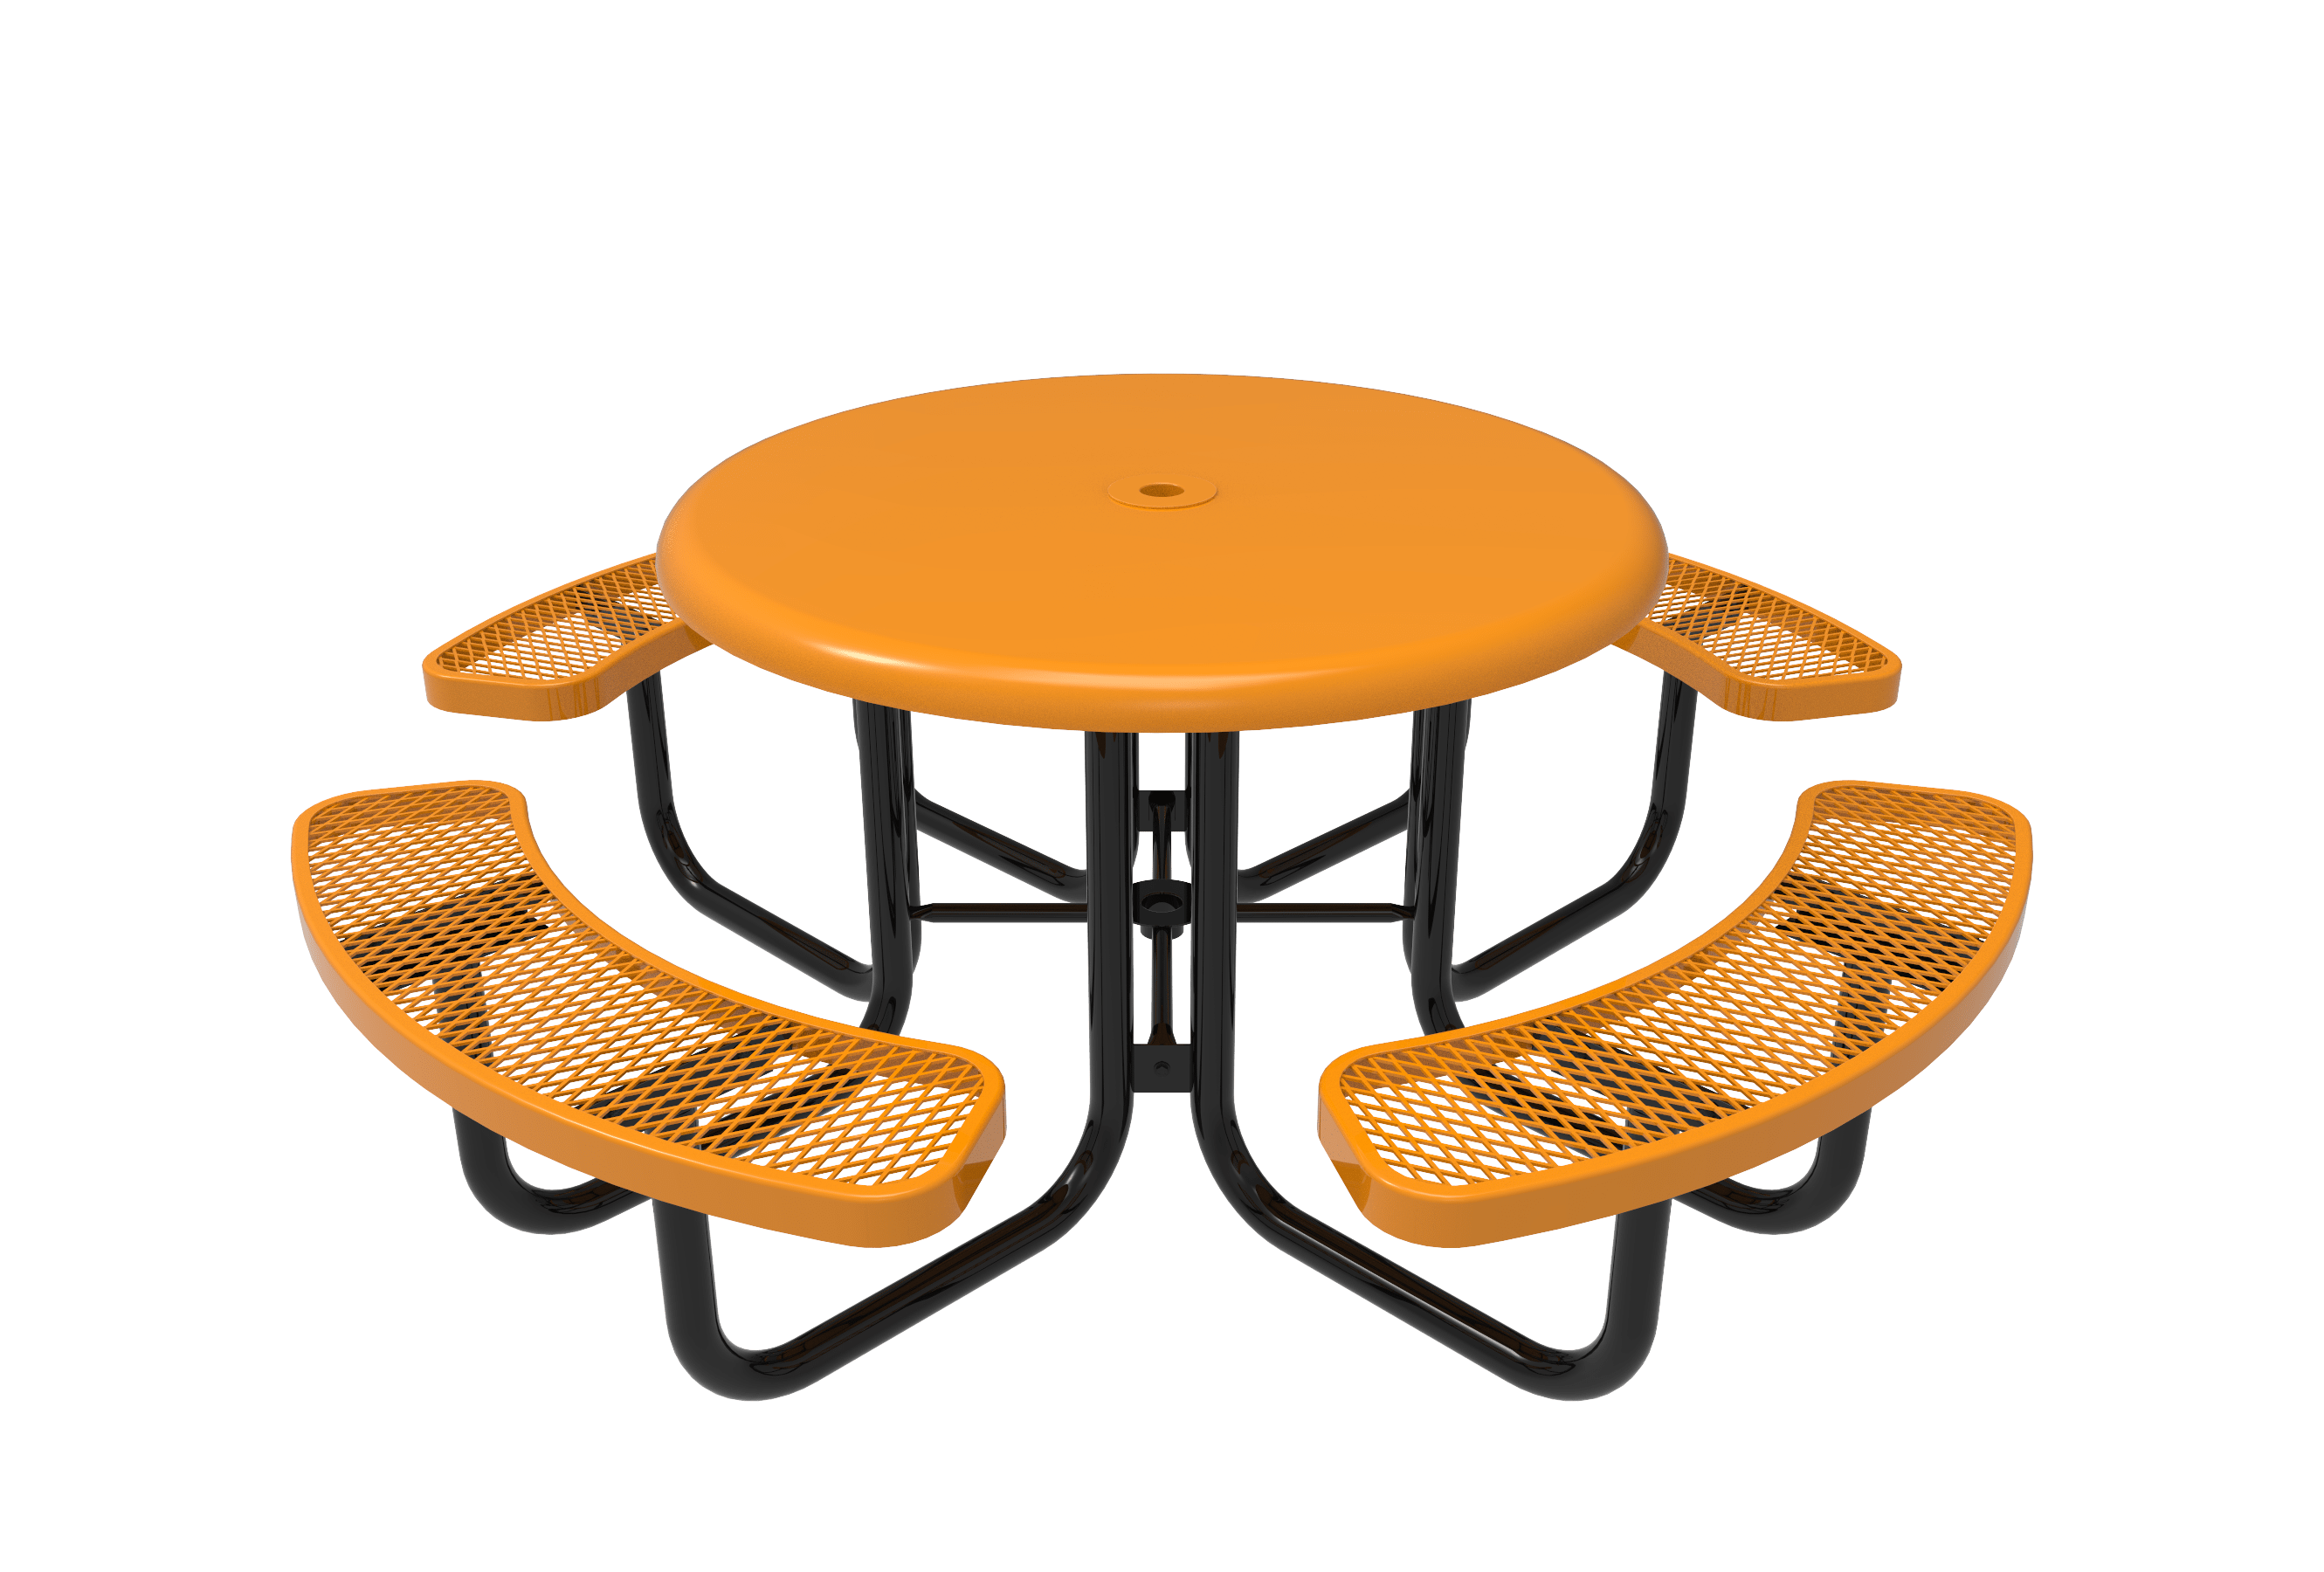 46″ Round Solid Picnic Table 4 Seat-Mesh
TRS46-C-04-000
Industry Standard Finish
$1249.00
TRS46-A-04-000
Advantage Premium Finish
$1669.00
